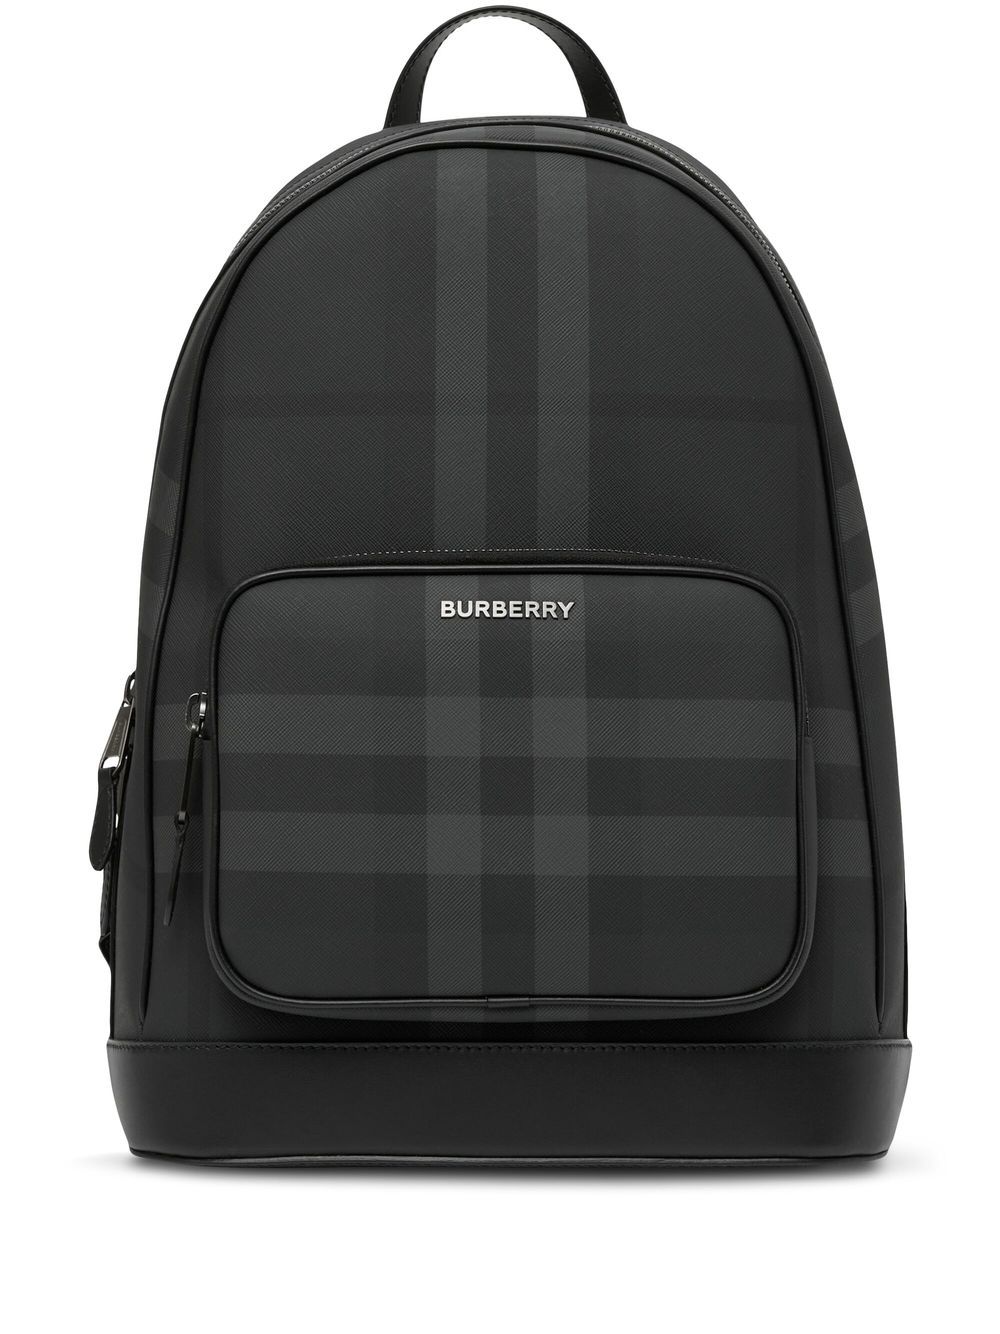 Burberry check small backpack - Grey von Burberry